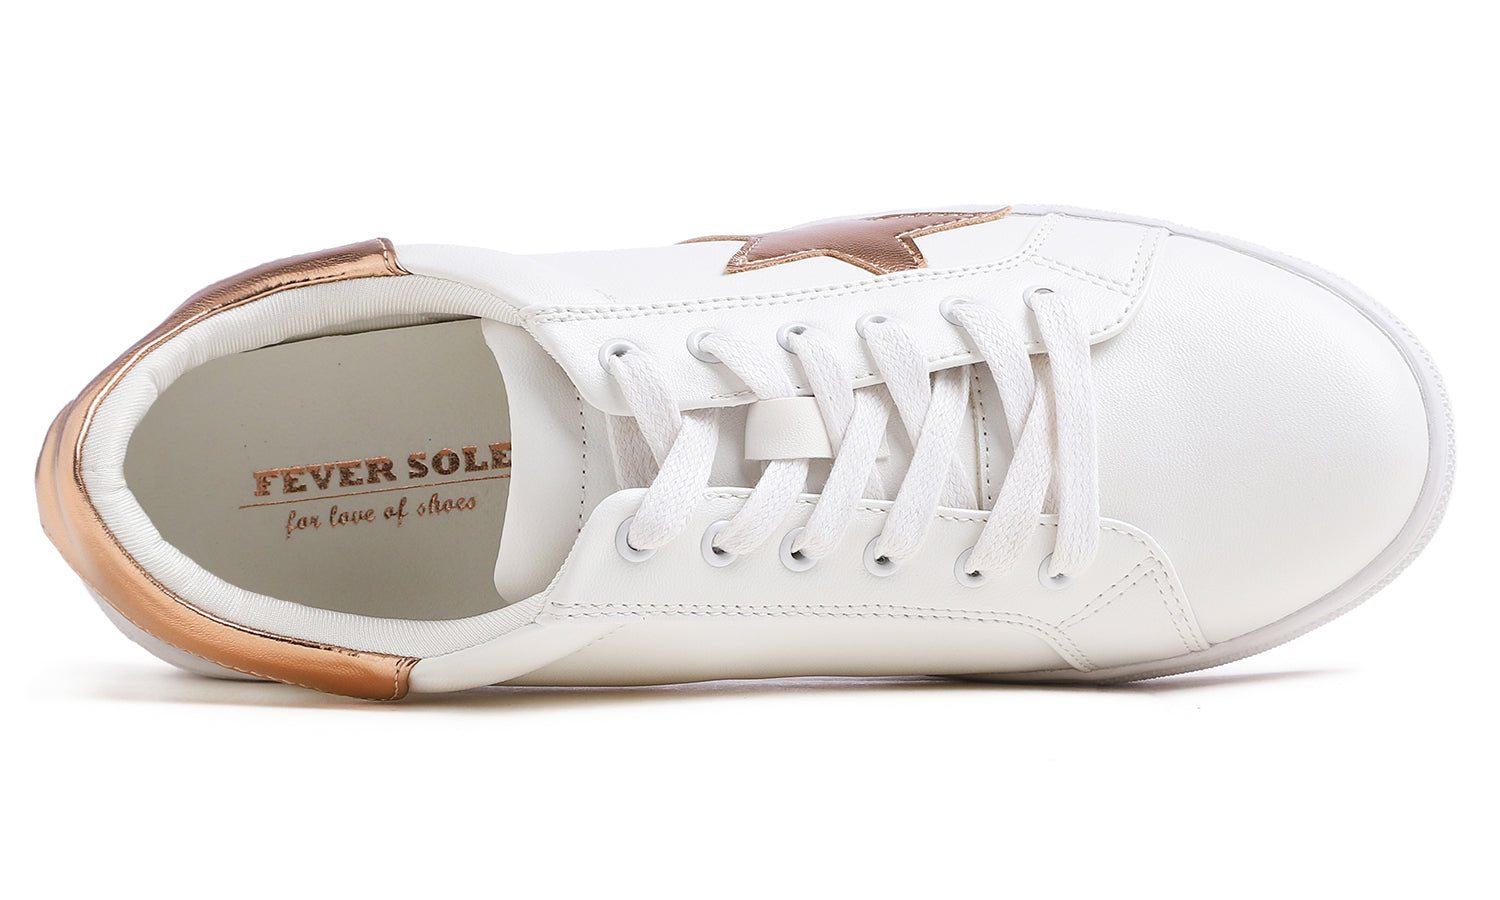 Feversole Women's Featured PU Leather White Lace Up Sneaker Rose Gold Star